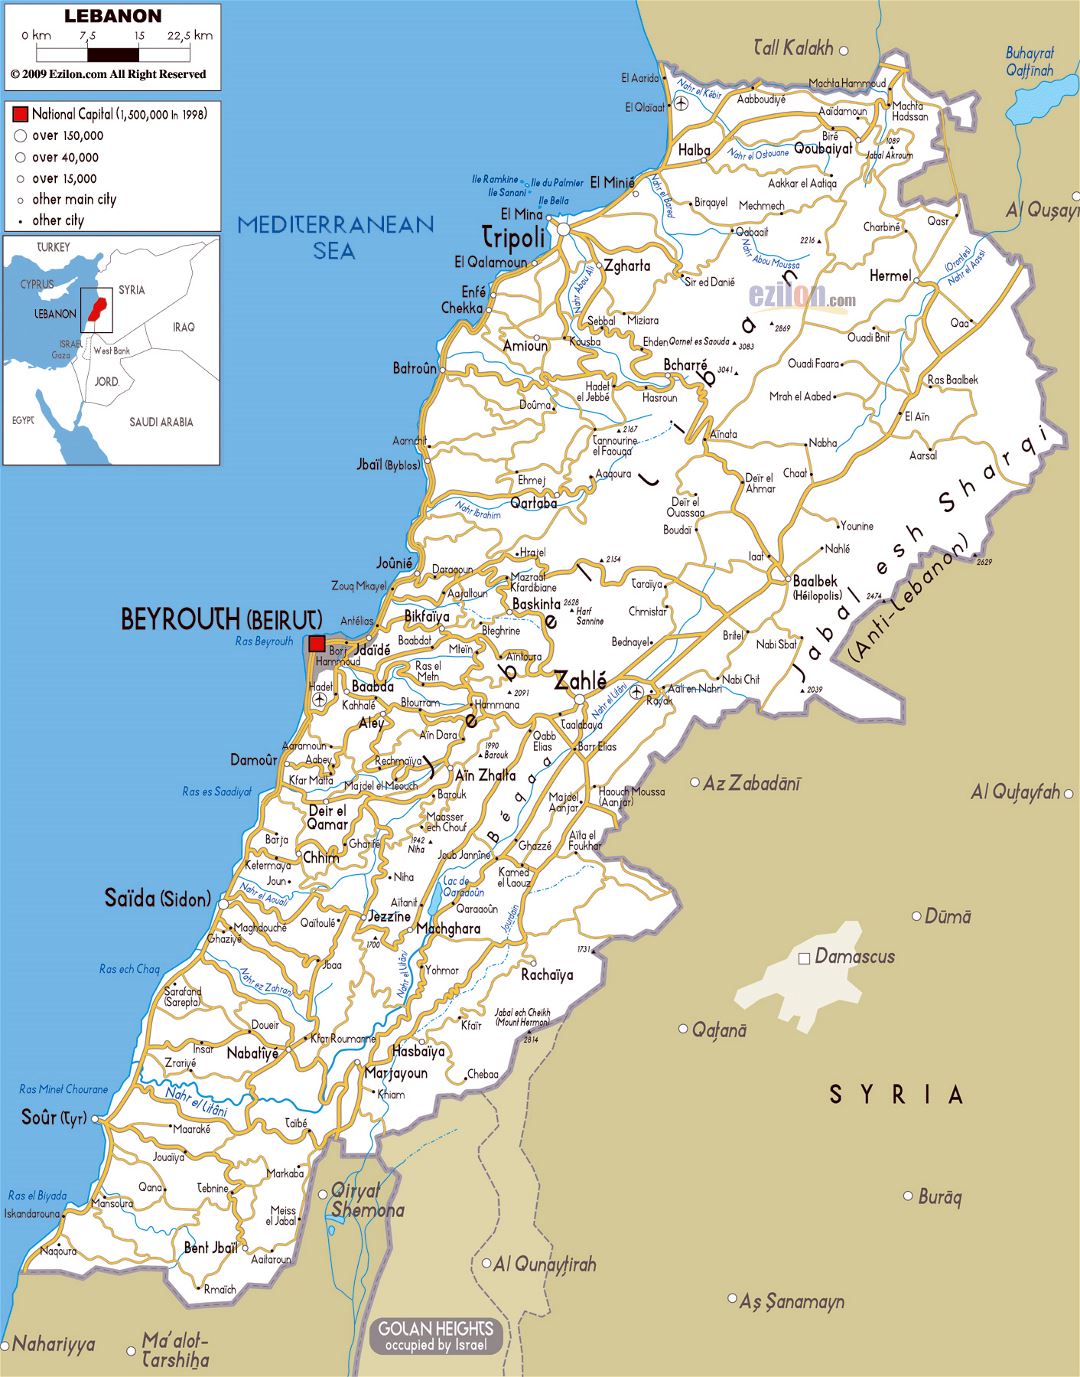 Large road map of Lebanon with cities and airports